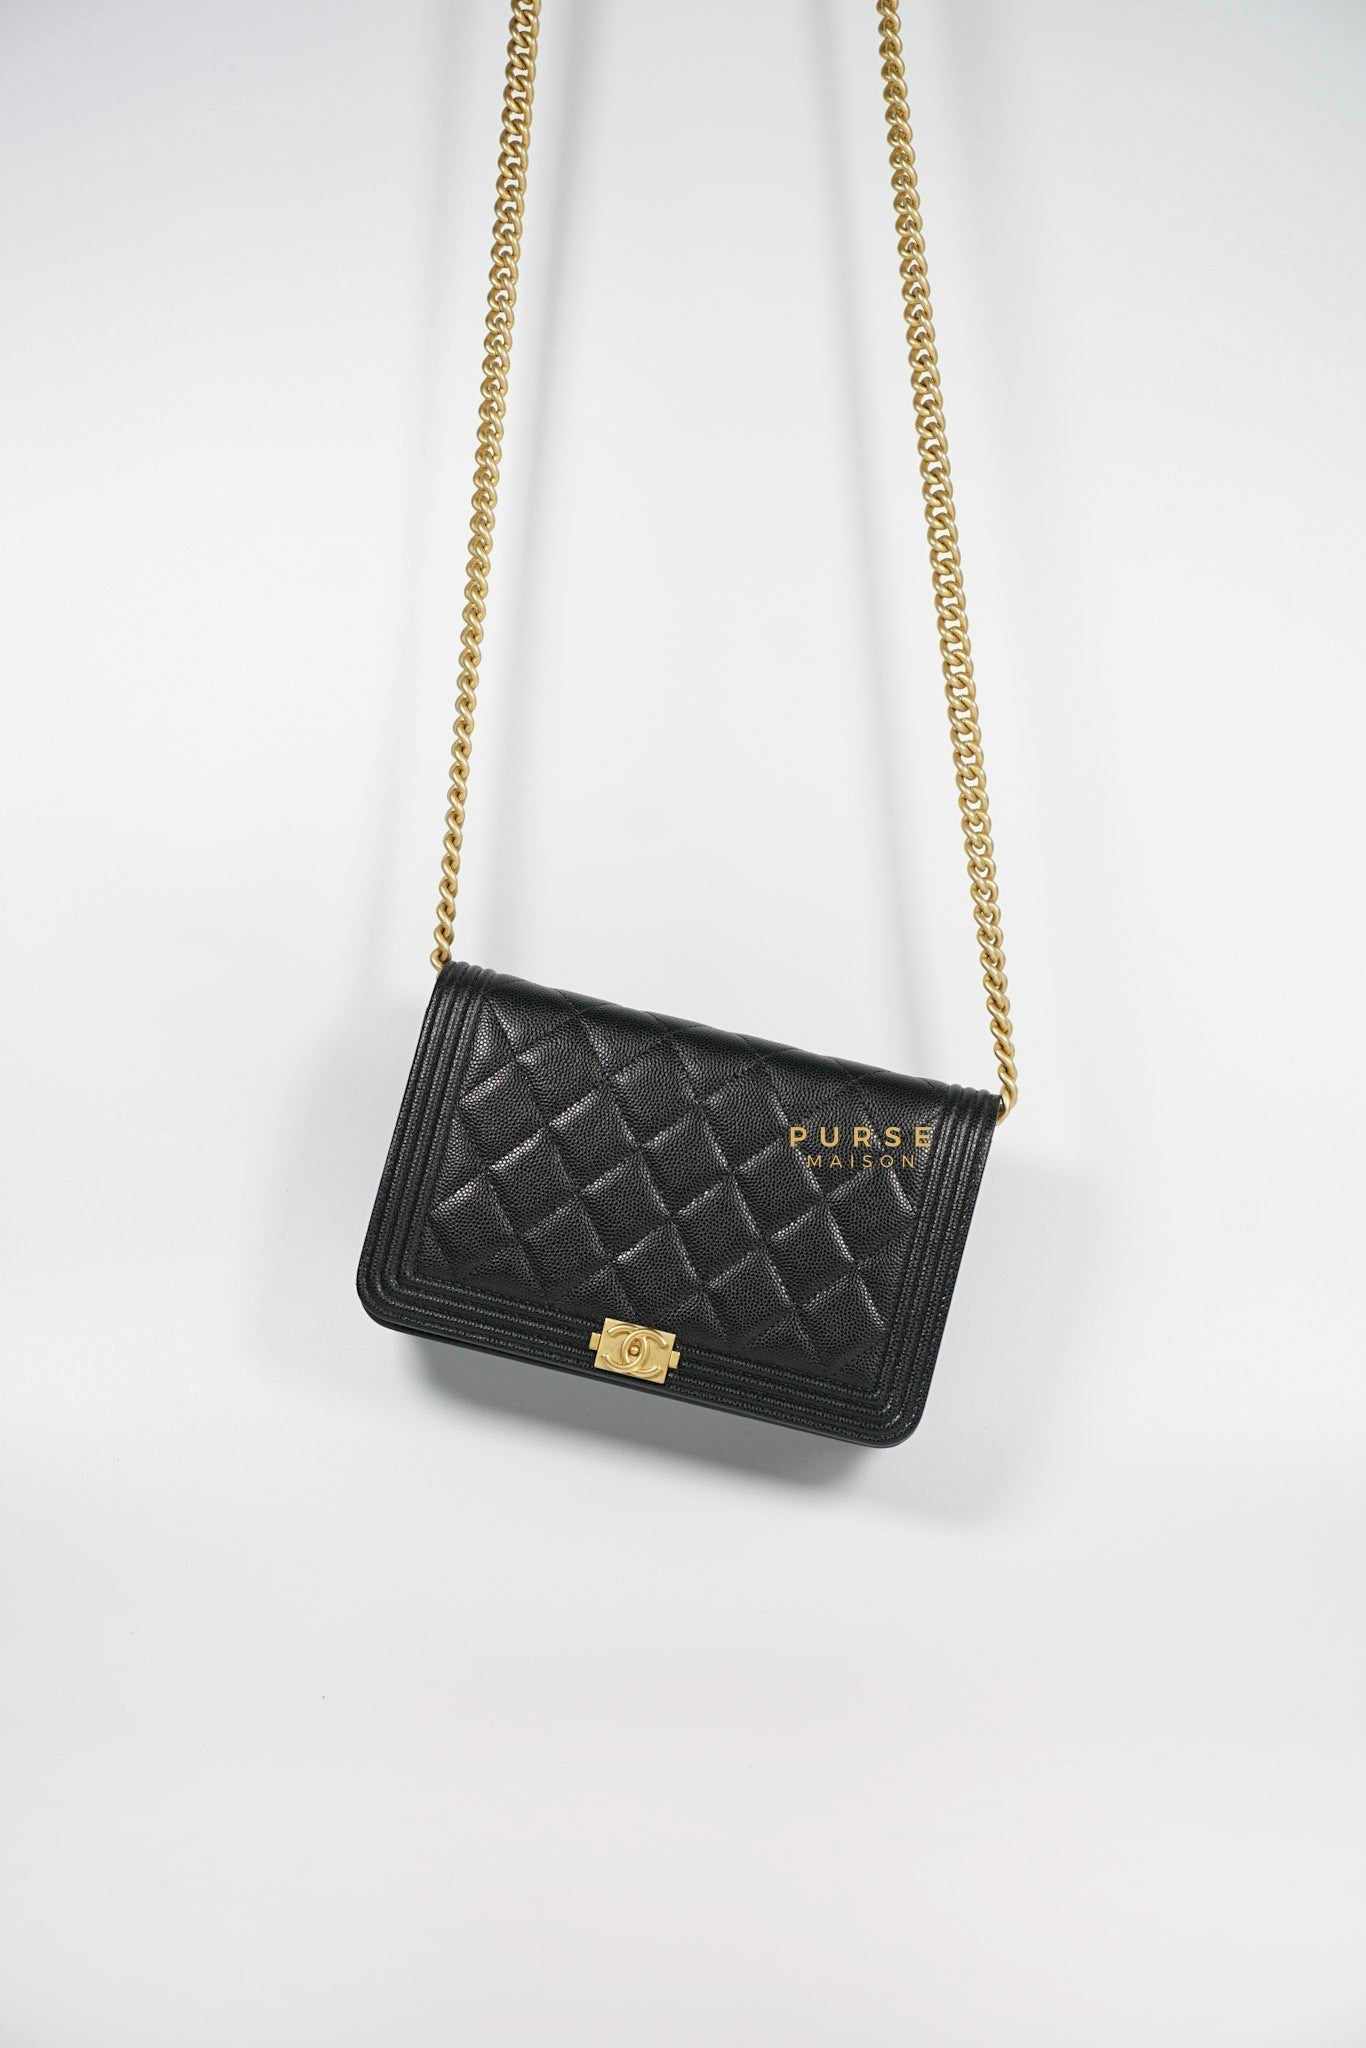 Chanel Boy Wallet On Chain Woc Caviar And Aged Gold Hardware (Microchip)